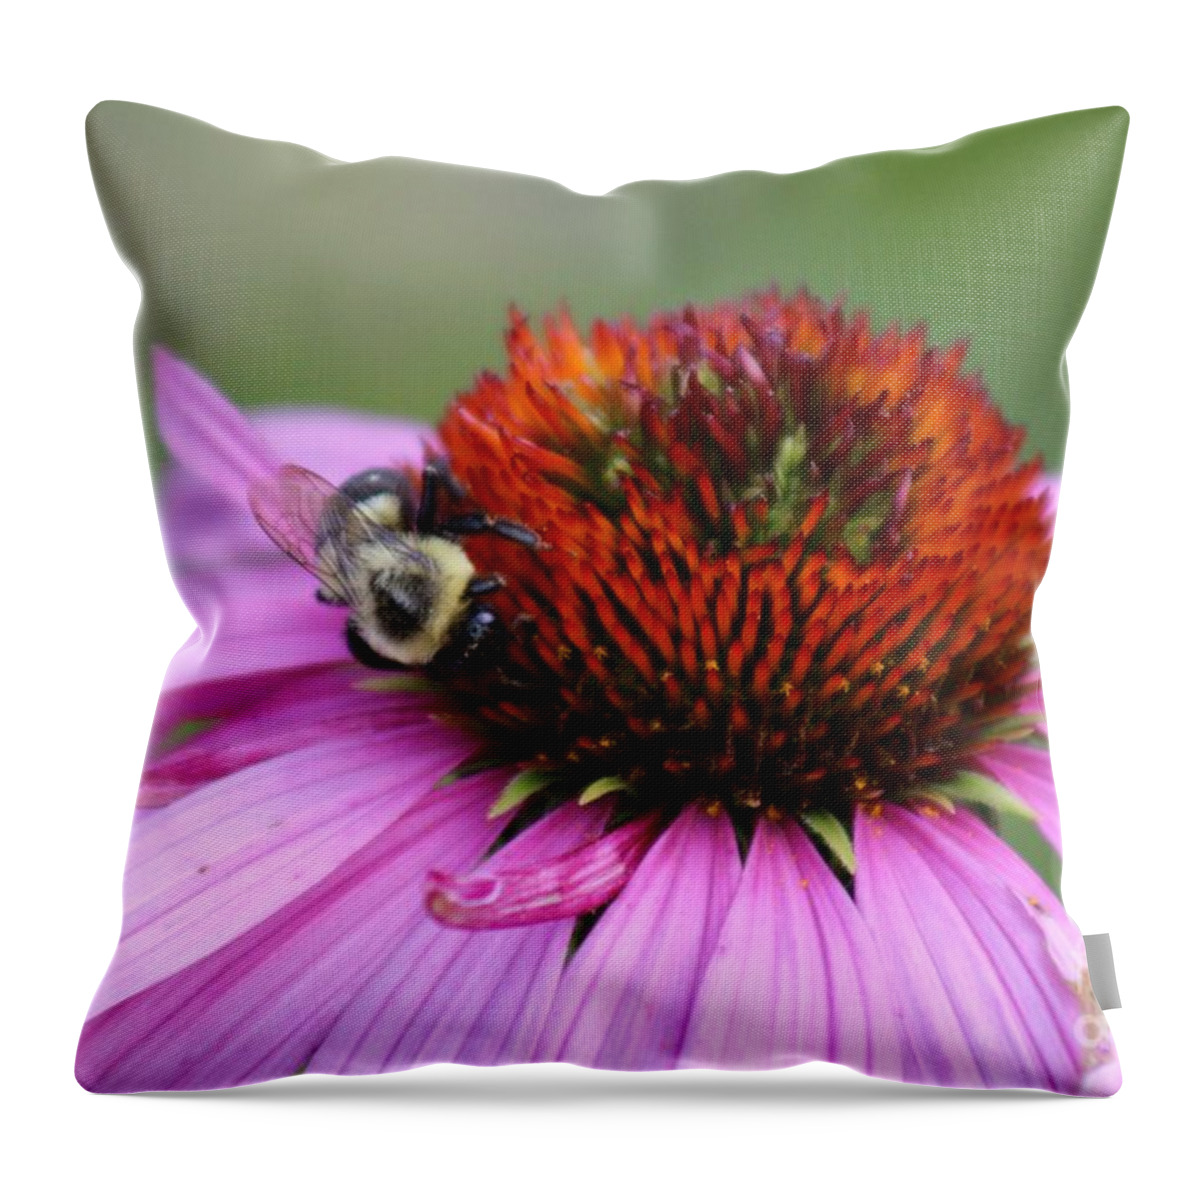 Pink Throw Pillow featuring the photograph Nature's Beauty 84 by Deena Withycombe